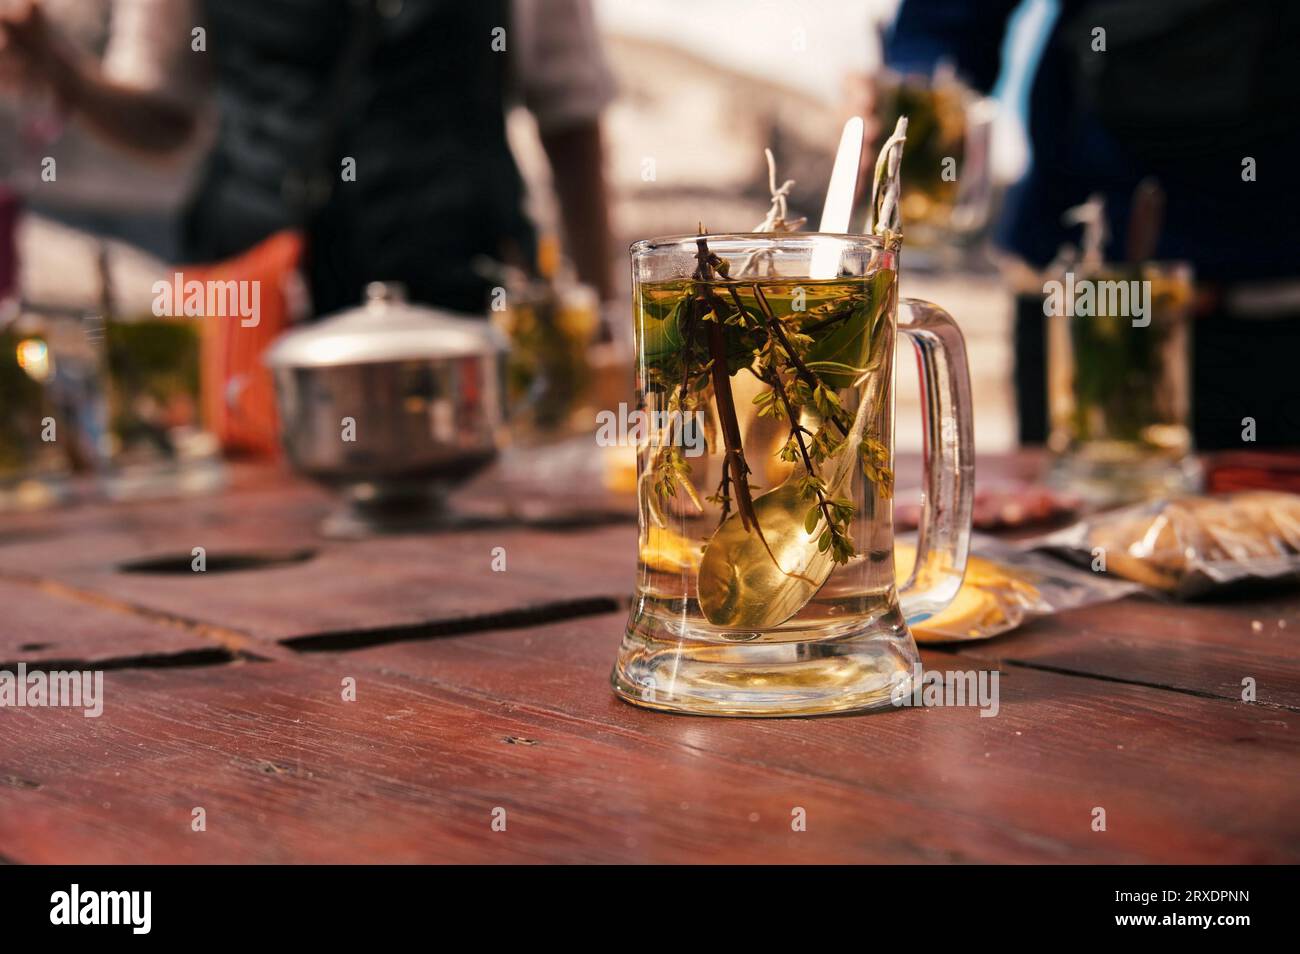 Cup of coca-leaf tea for preventing altitude sickness Stock Photo